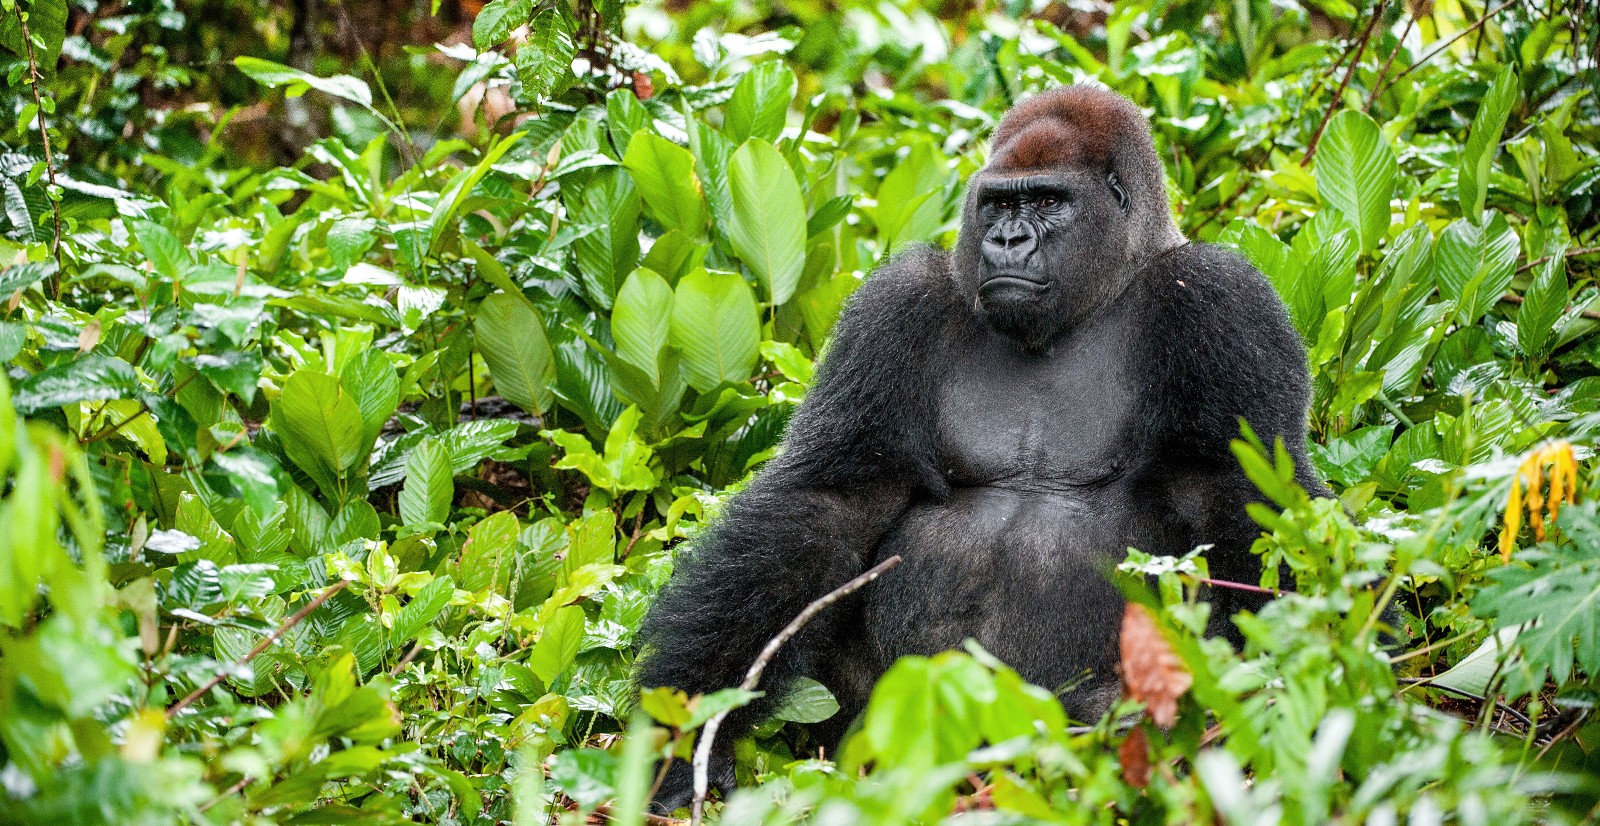 A photo of a large adult gorilla sitting in the dense green undergrowth of the forest